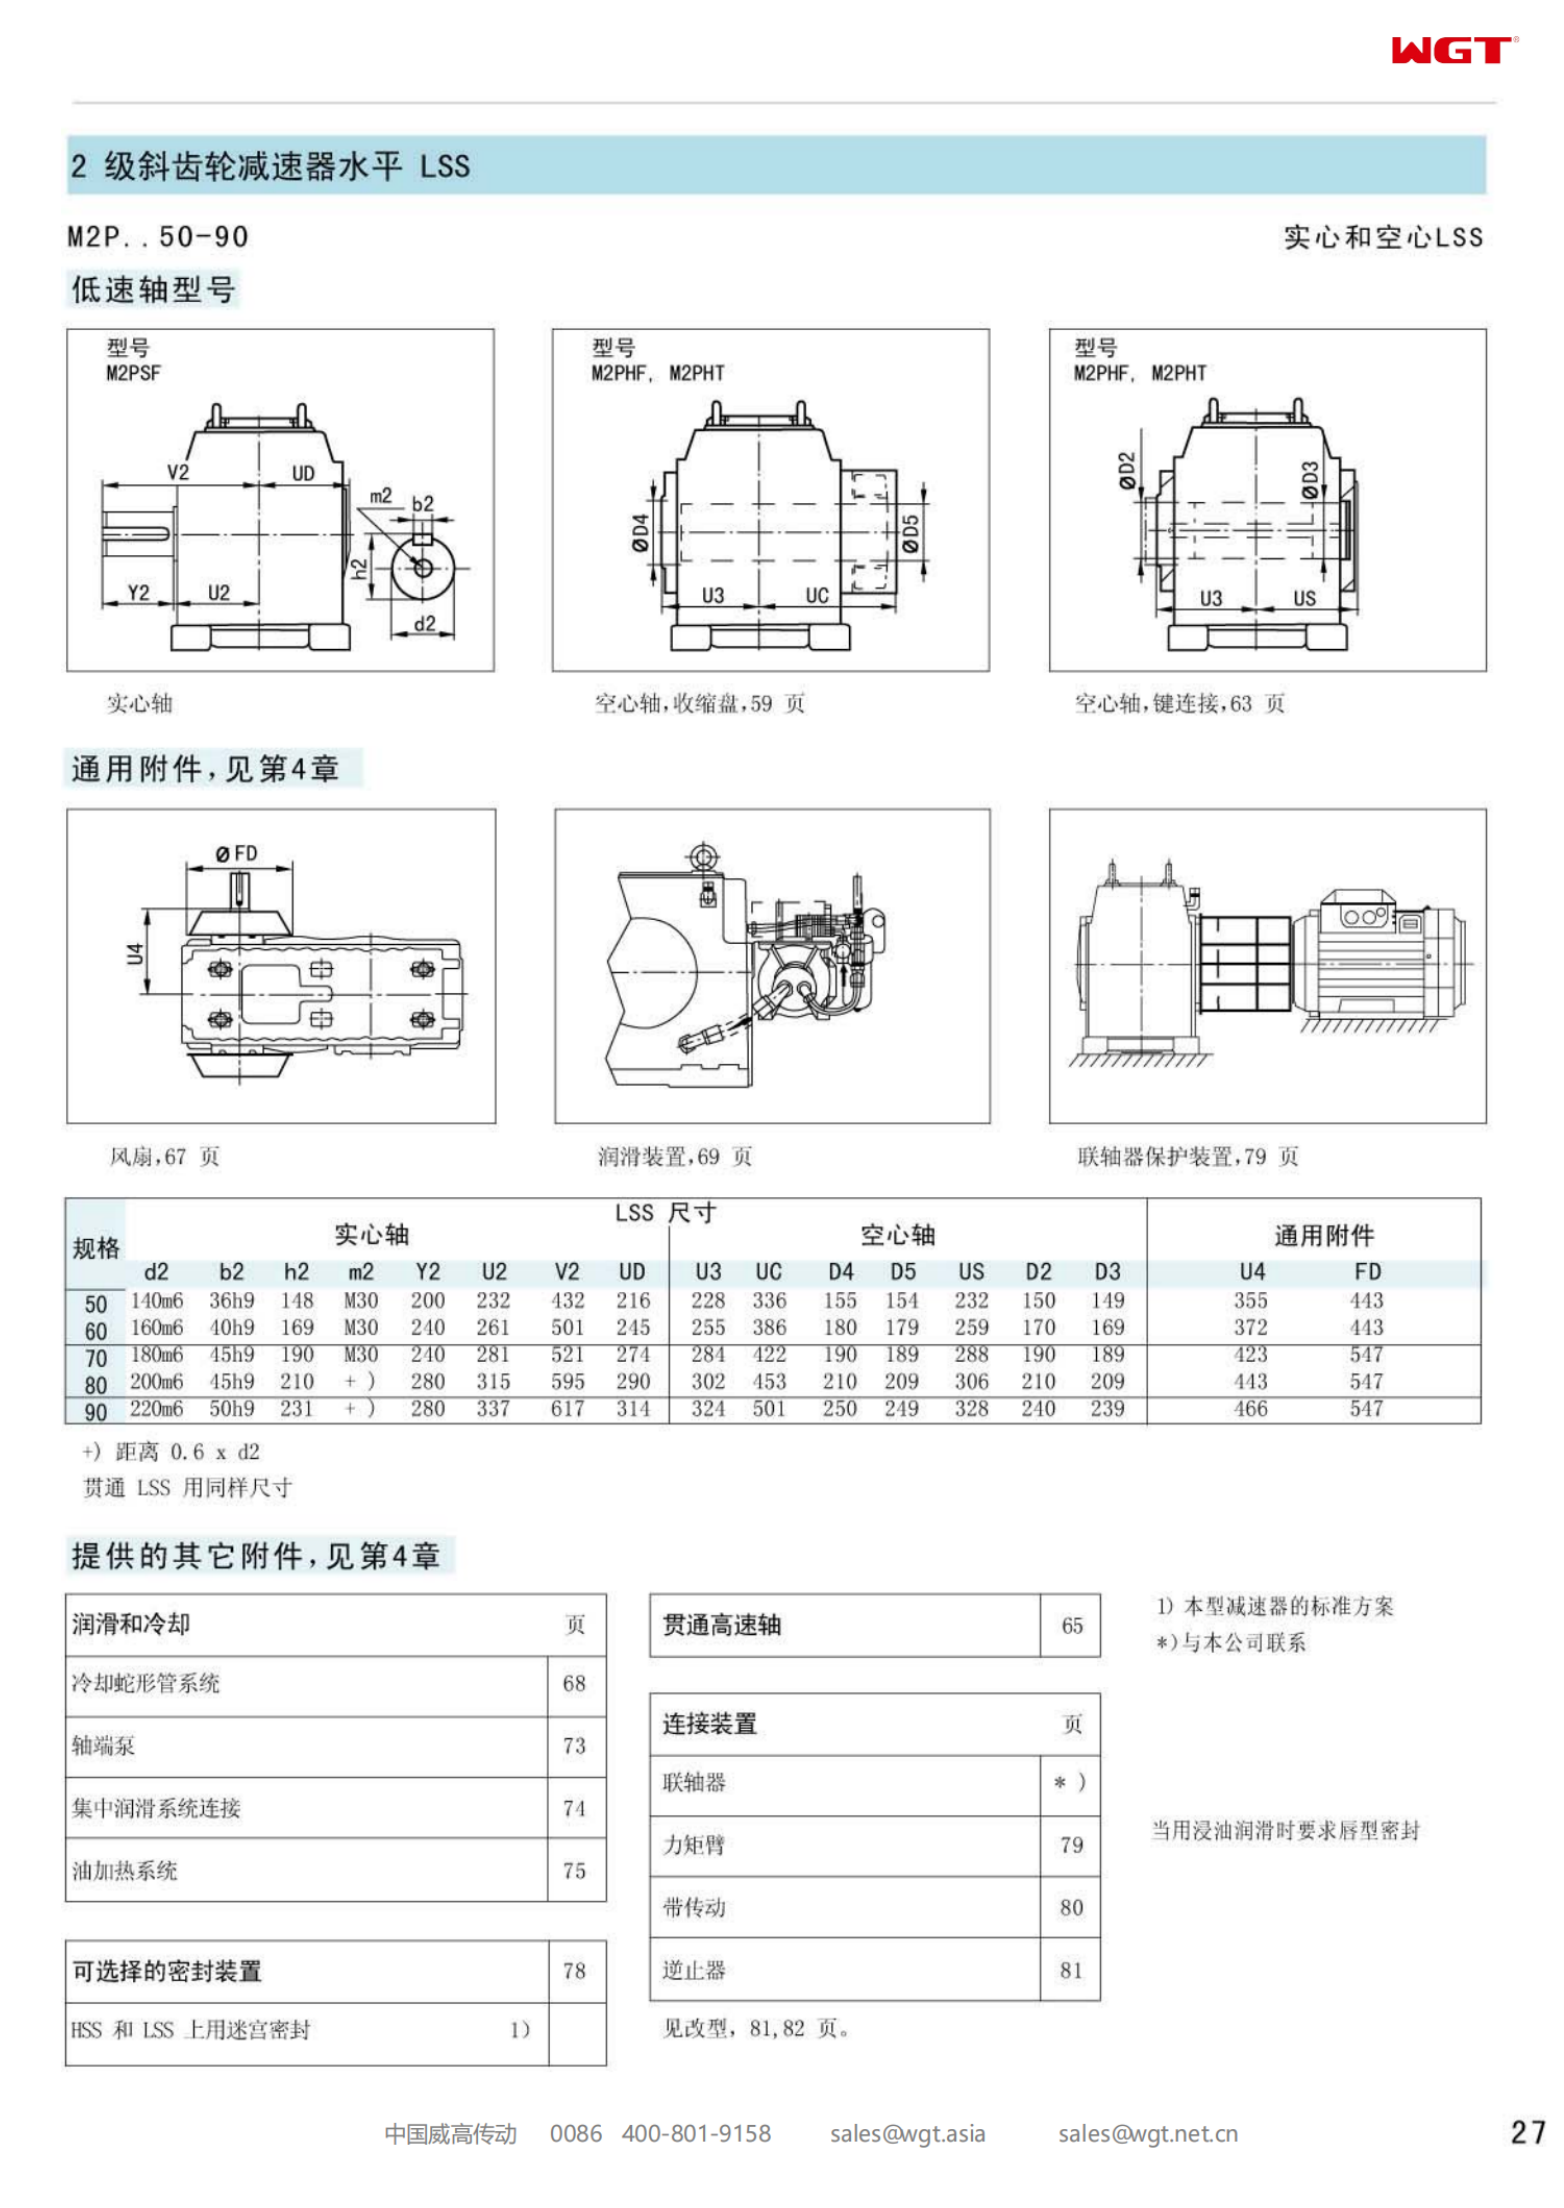 M2PHT90 Replace_SEW_M_Series Gearbox